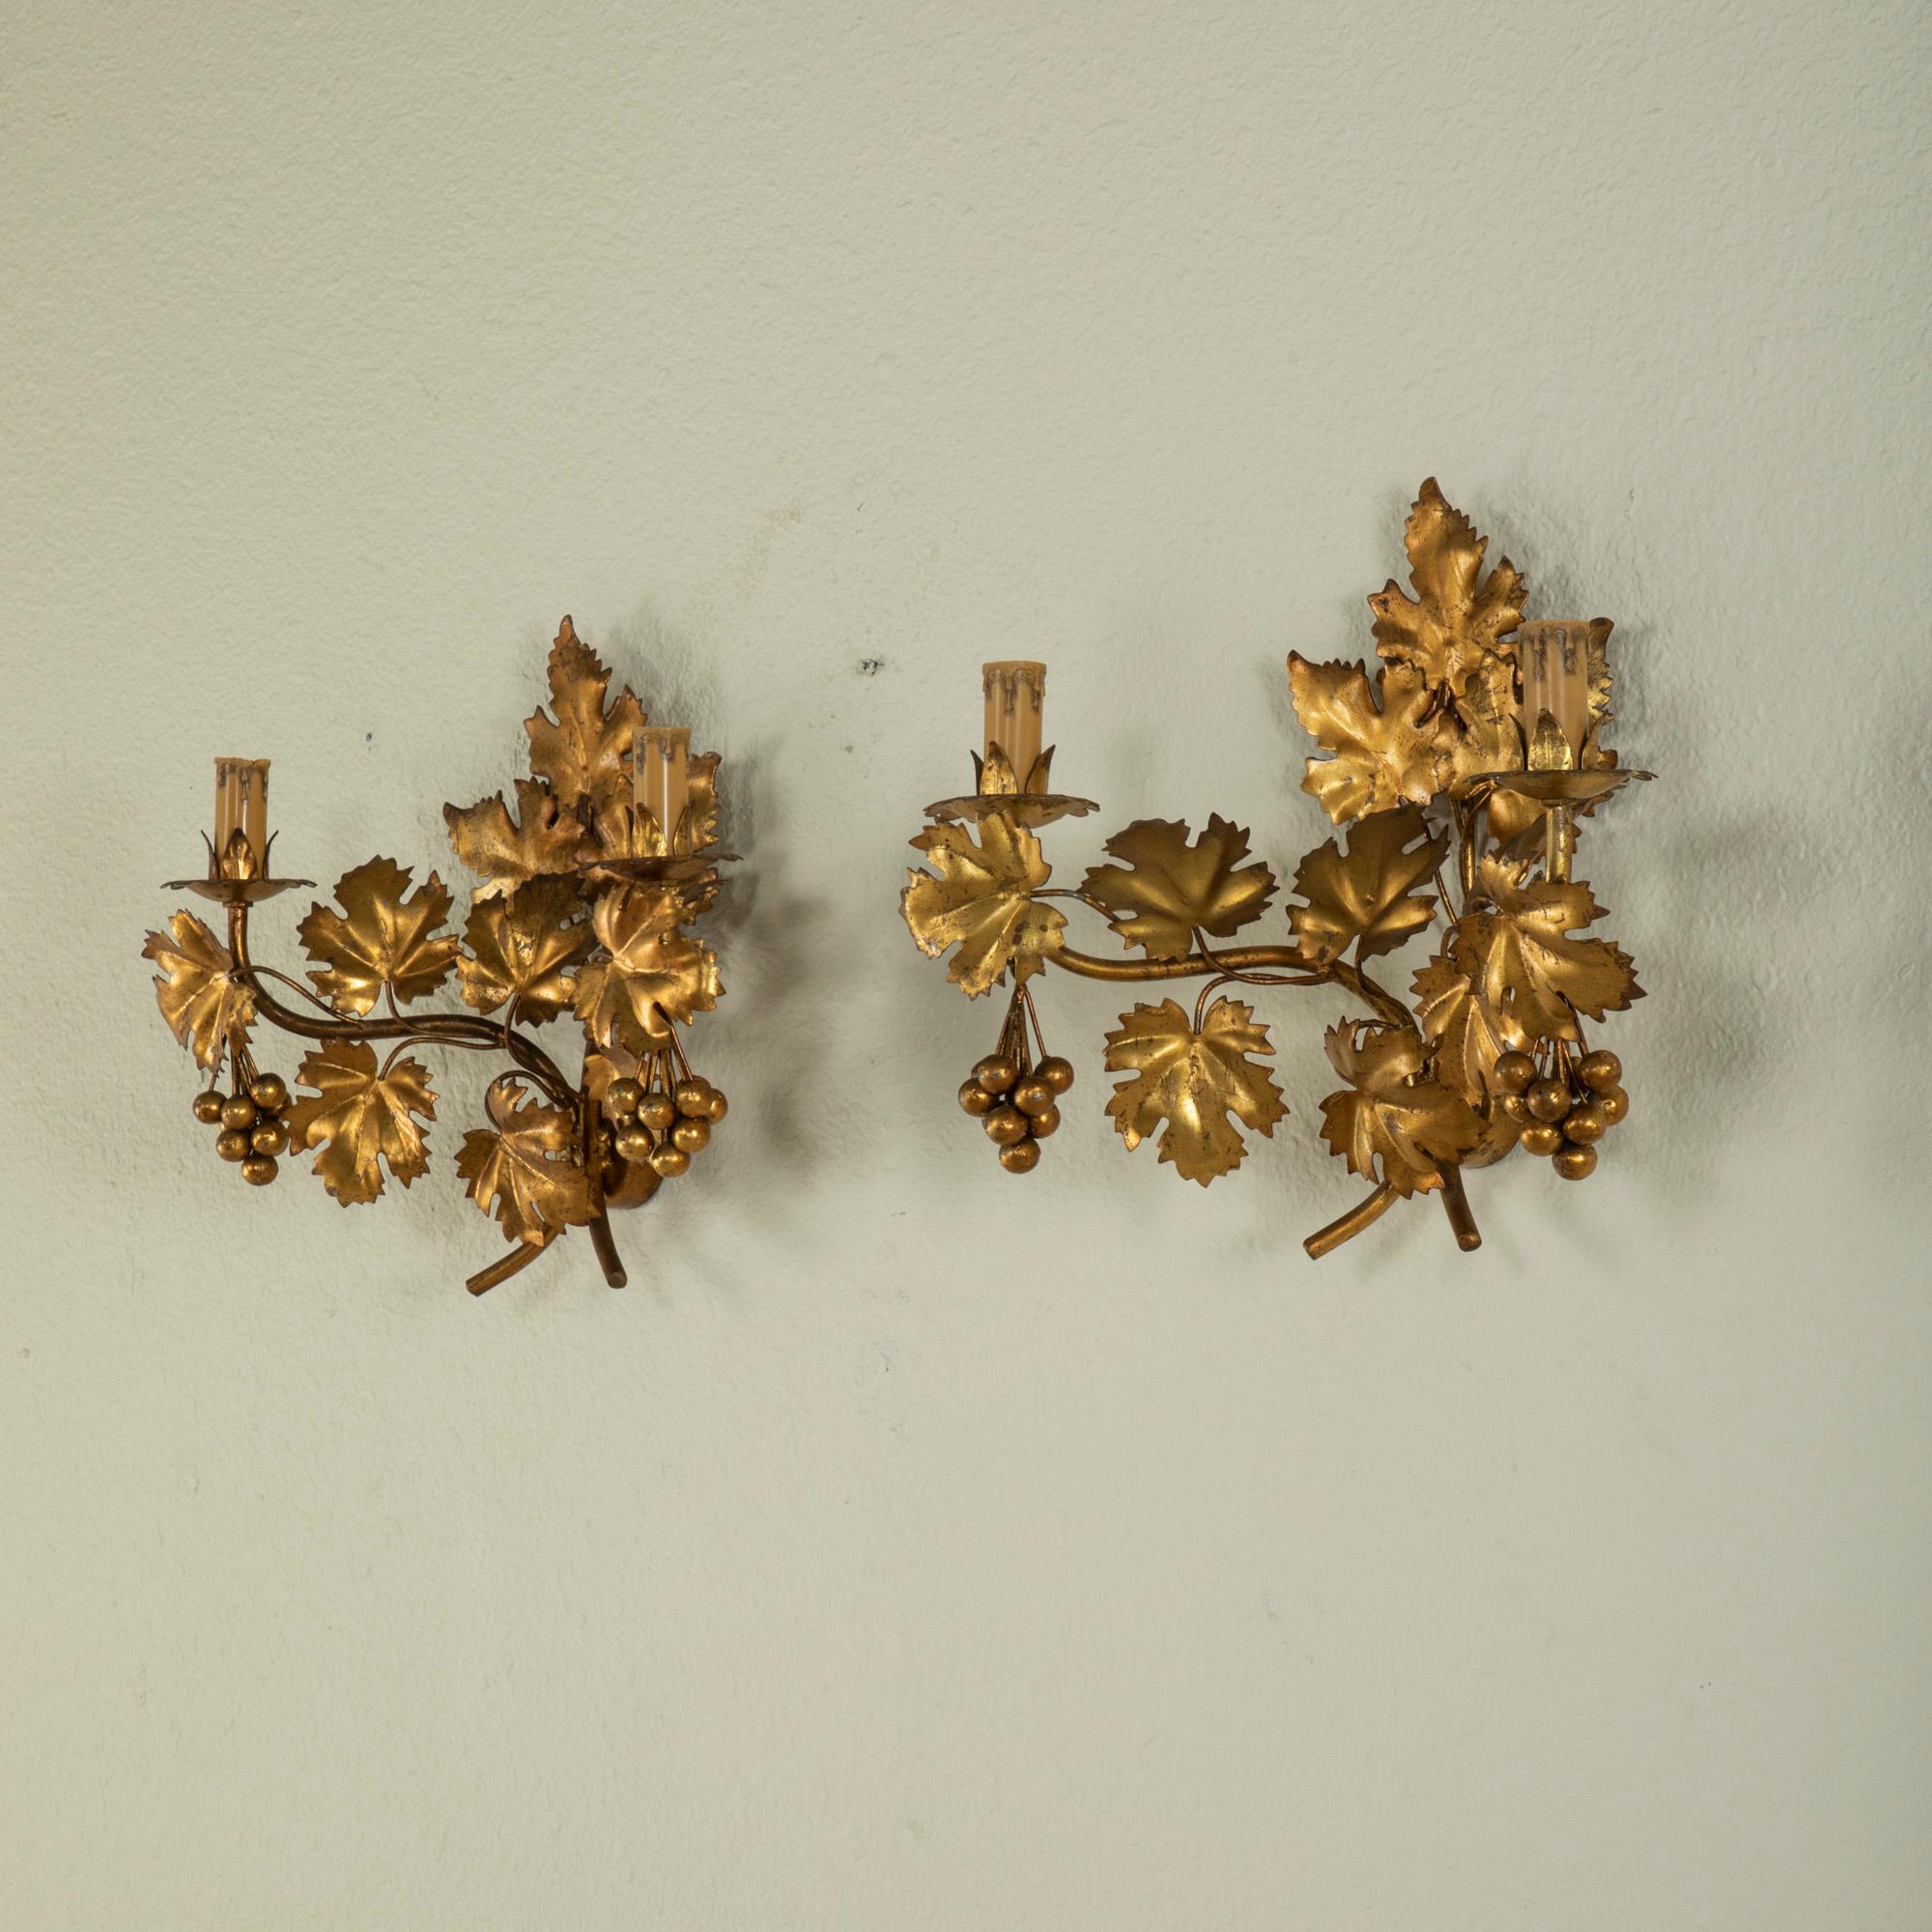 This pair of mid-century Italian gilt metal sconces features grape leaves that twist around the armatures. Bunches of grapes hang at each end of the sconces. At 14.5 inches in height, this fine pair makes a grand impact when flanking a mirror. These